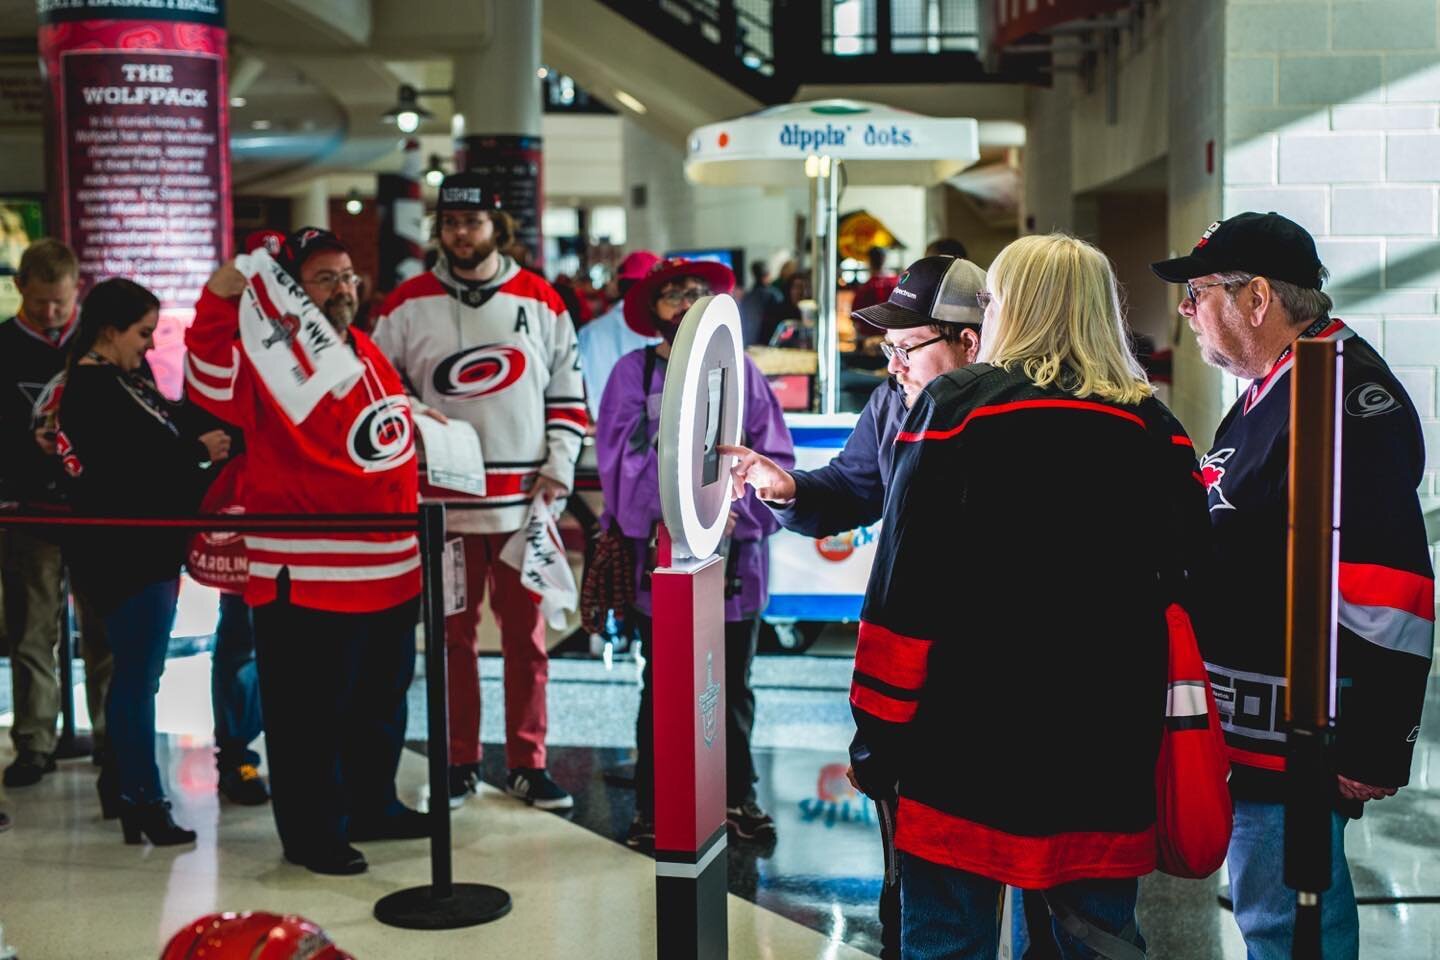 EXP PHOTO's activations for the Carolina Hurricanes playoff games saw huge success, bringing fans closer to the action and creating unforgettable memories. By providing an engaging and interactive experience, the team was able to increase fan engagem